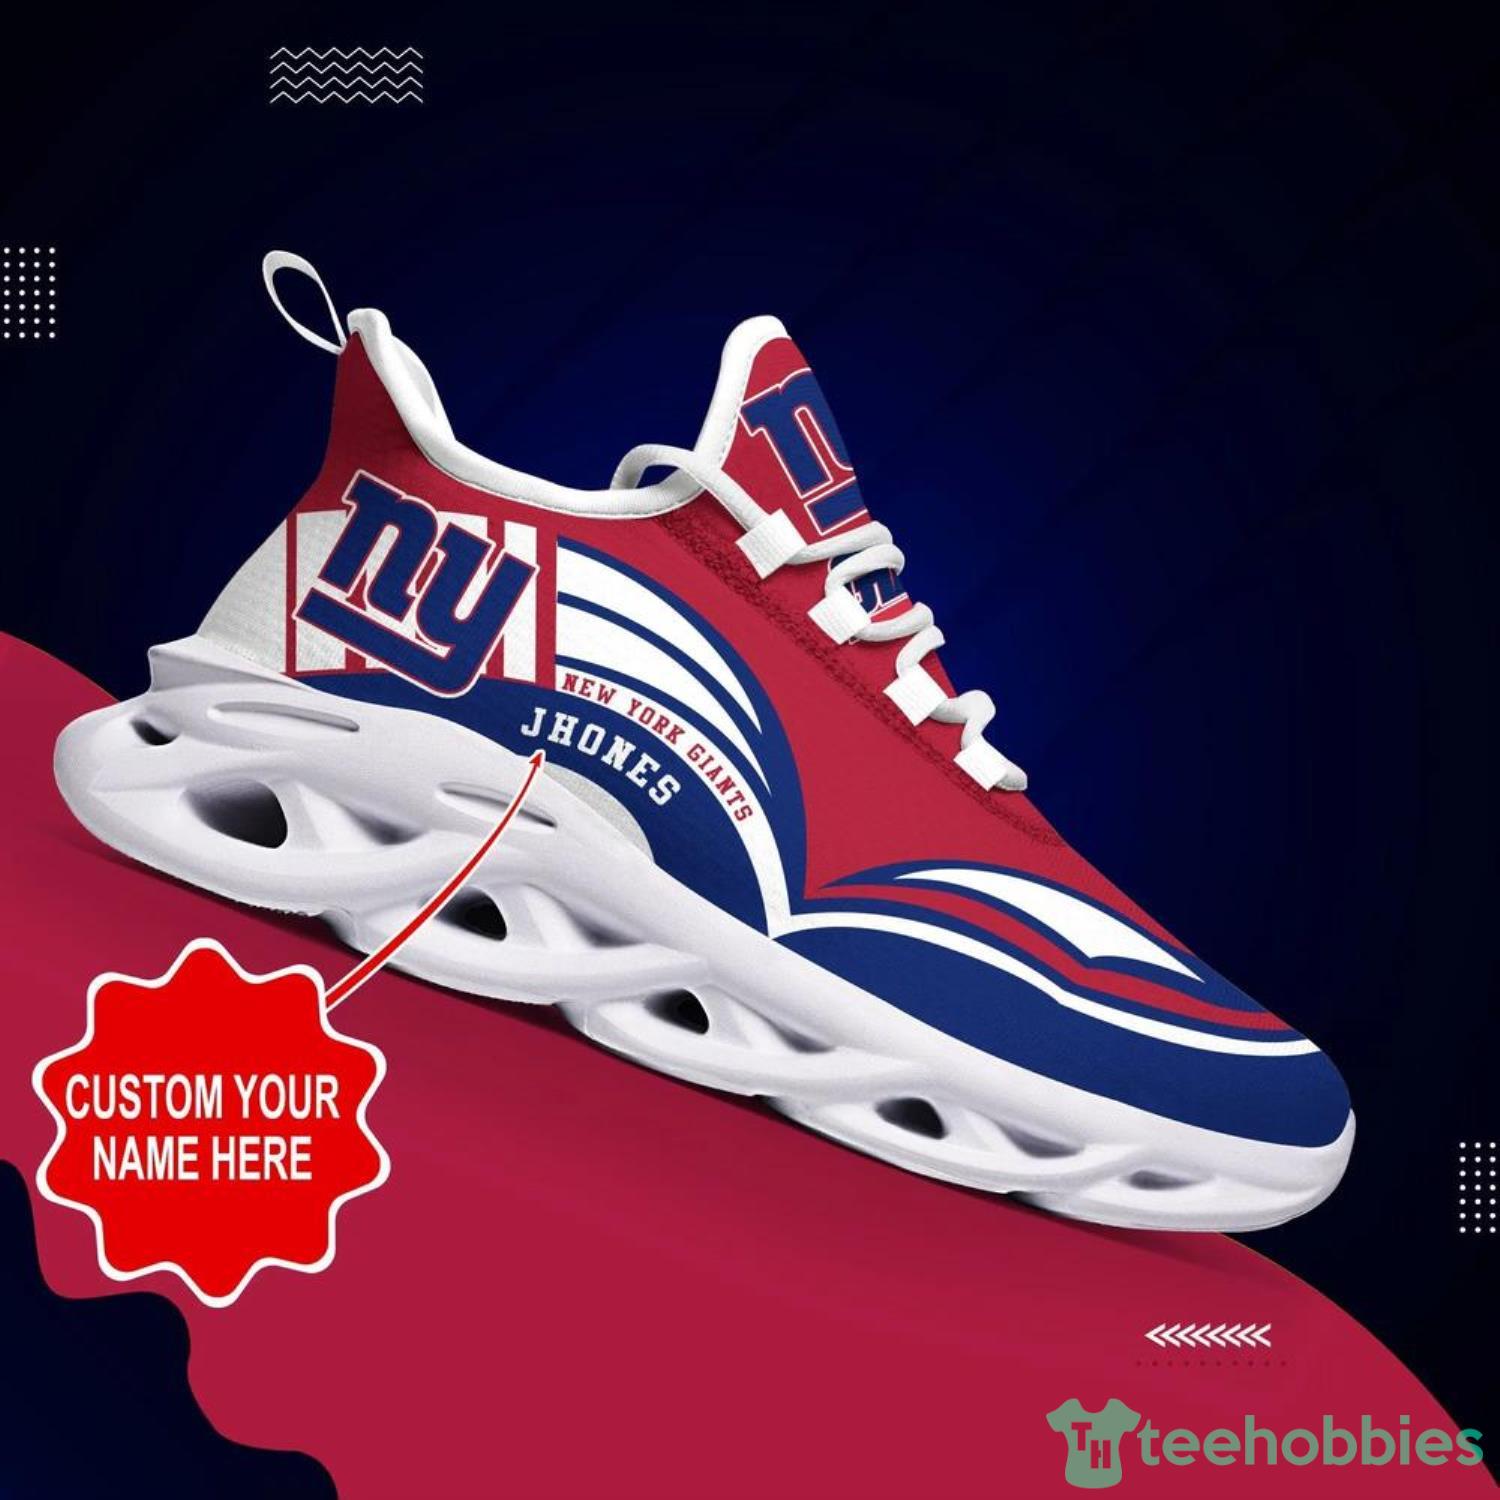 Personalize NFL New York Giants White Blue Max Soul Sneakers